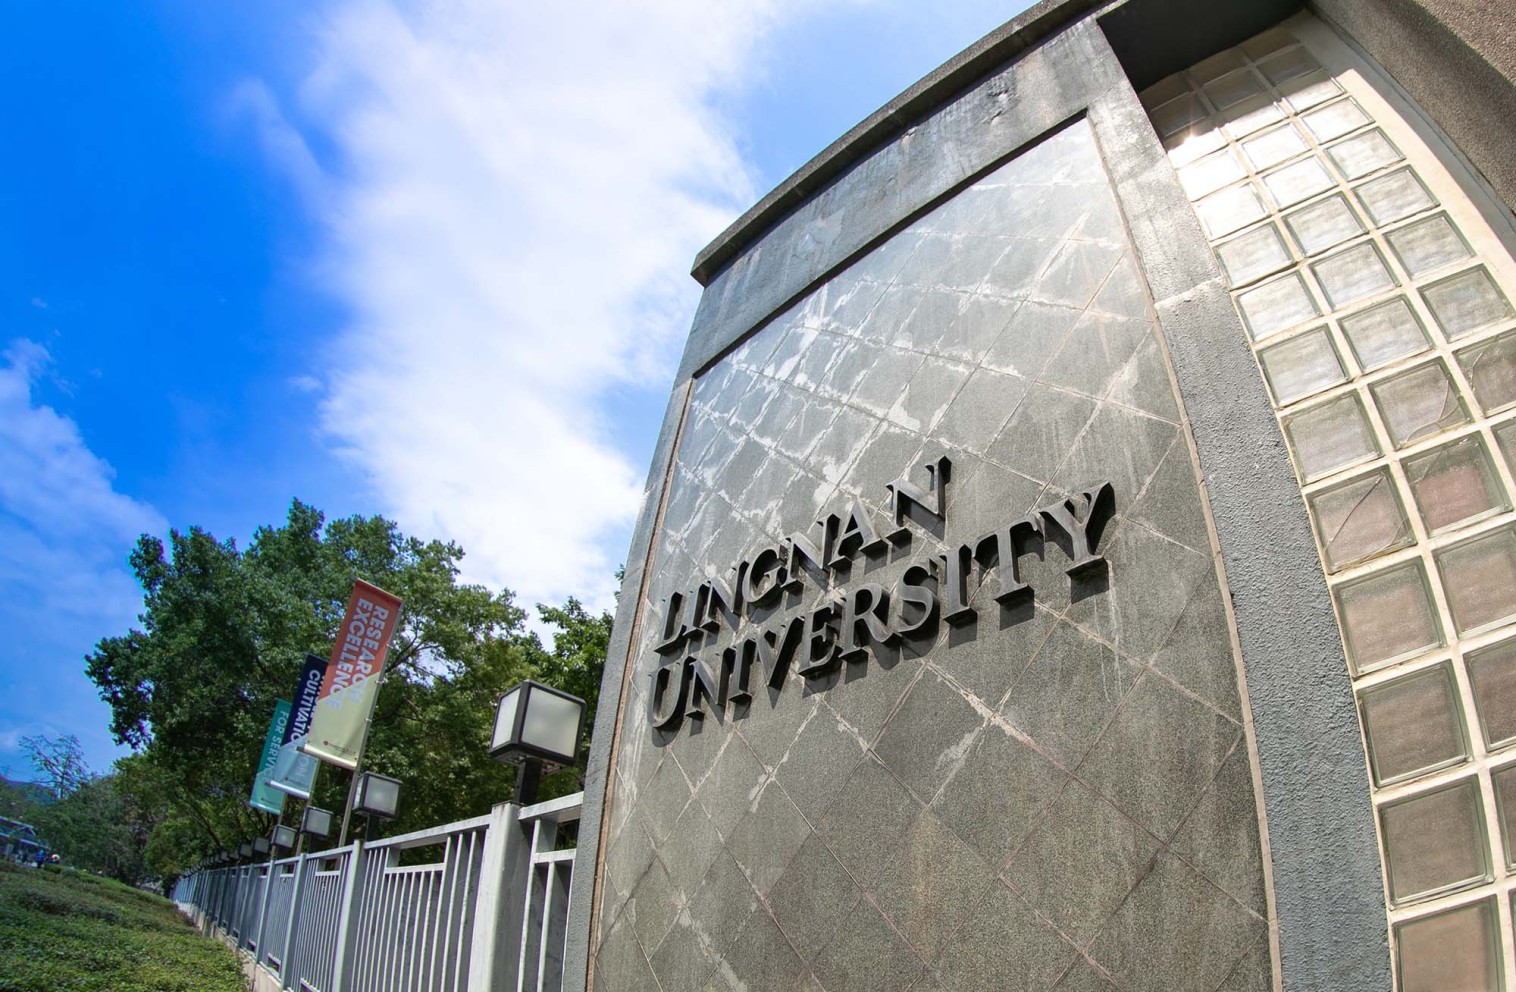 LU tops QS Asia University Rankings 2021 for ‘International Faculty’ and ‘Exchange Students’